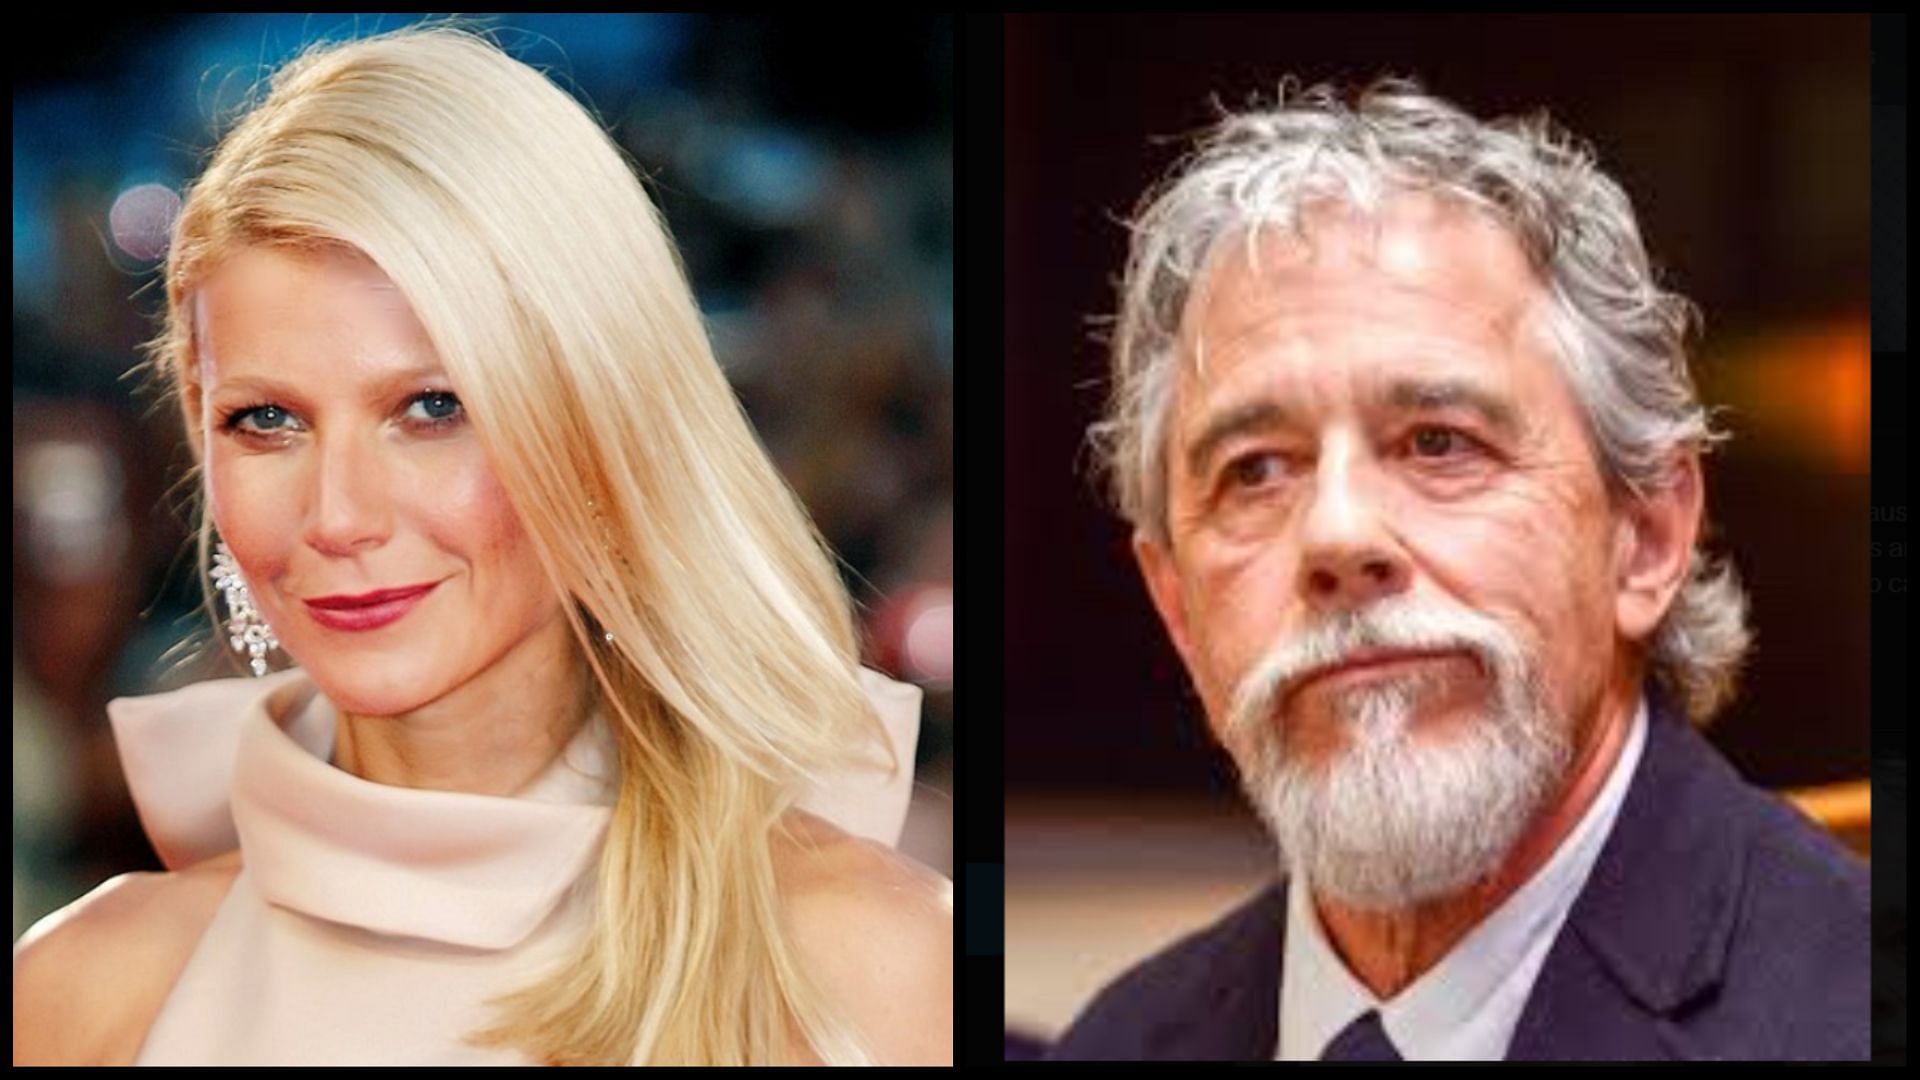 Terry Sanderson takes Gwyneth Paltrow to court (Image via Twitter/KimHadder15)